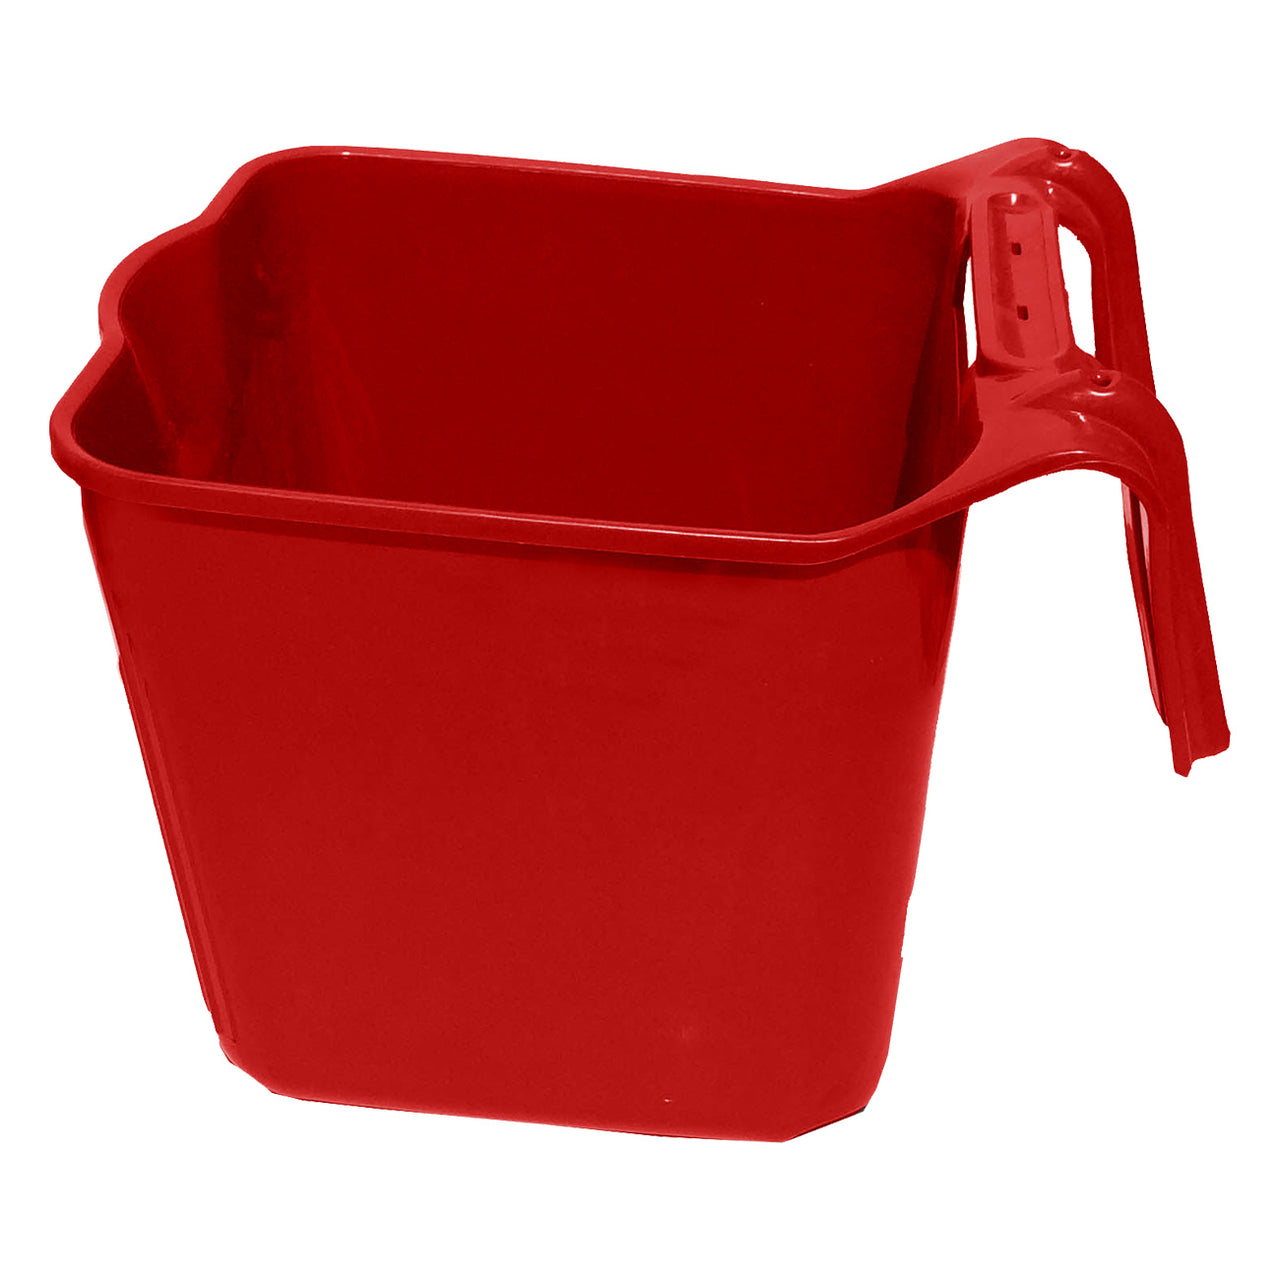 Tuff Stuff Square Fence Feeder 14 Qts (Red) - Buckets Pails Feeders Scoops Tubs Bottles Tuff Stuff - Canada